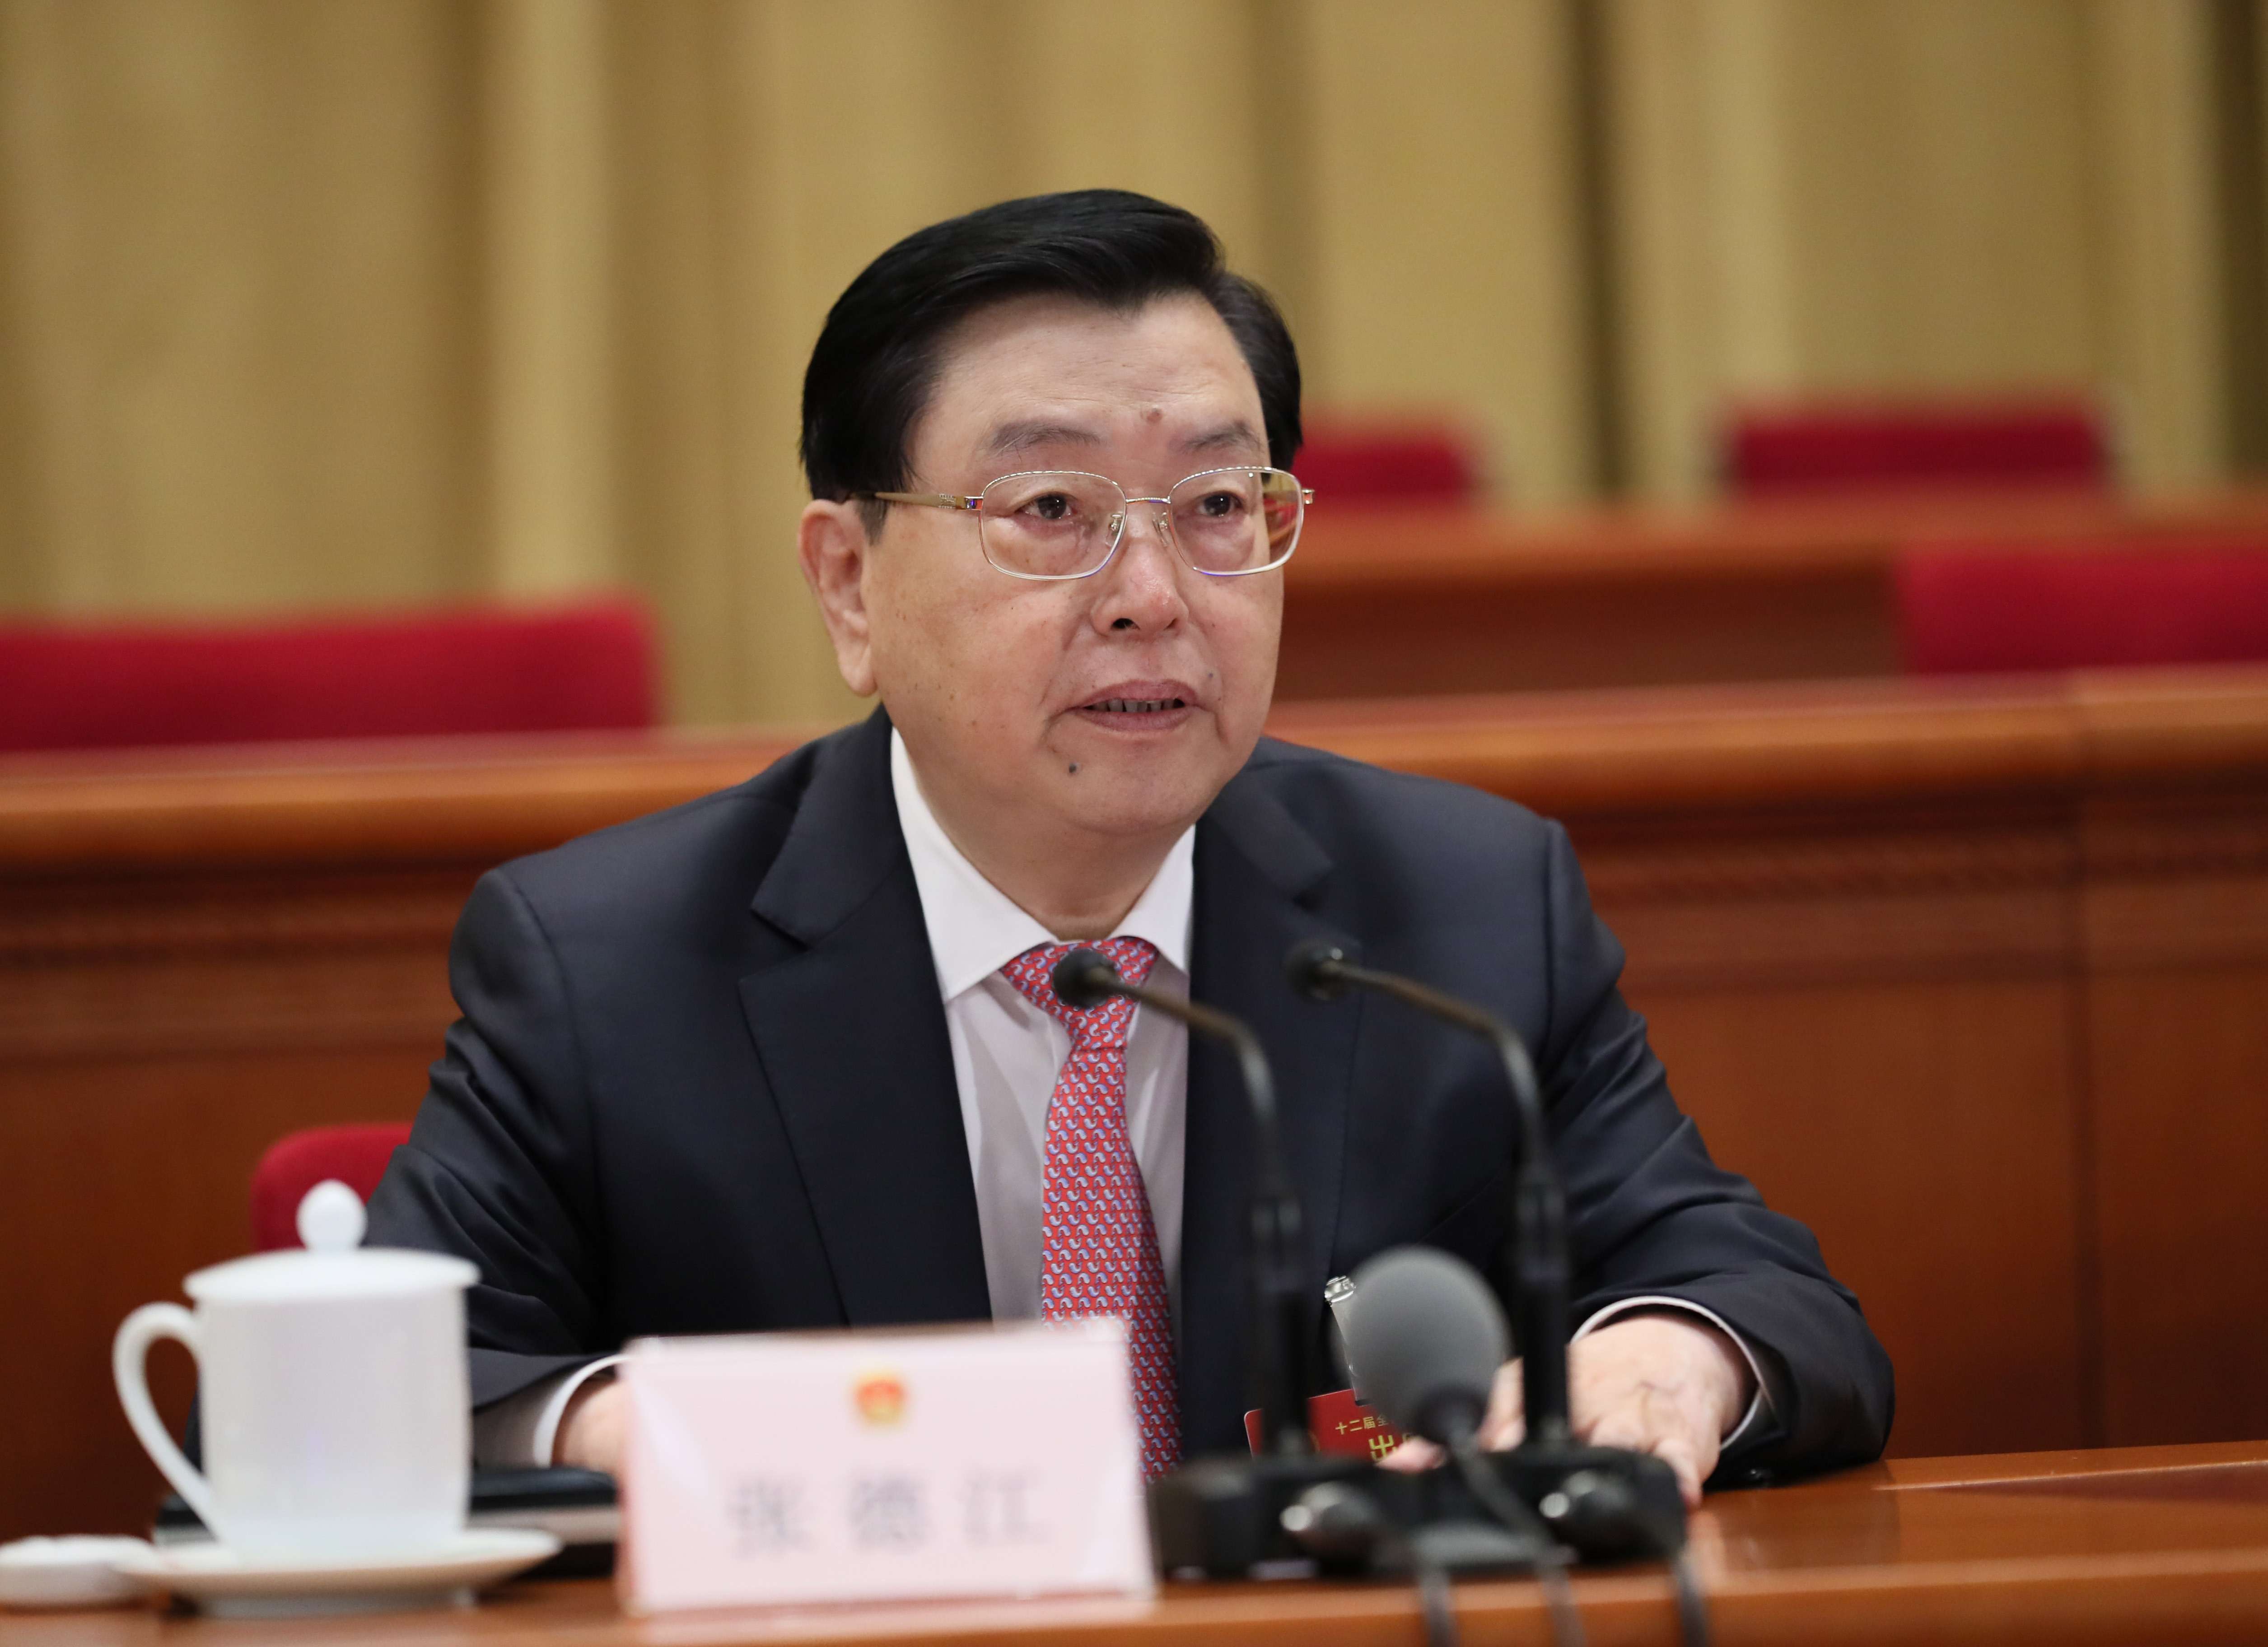 Zhang warned Hong Kong against challenging the bottom line of national sovereignty. Photo: Xinhua